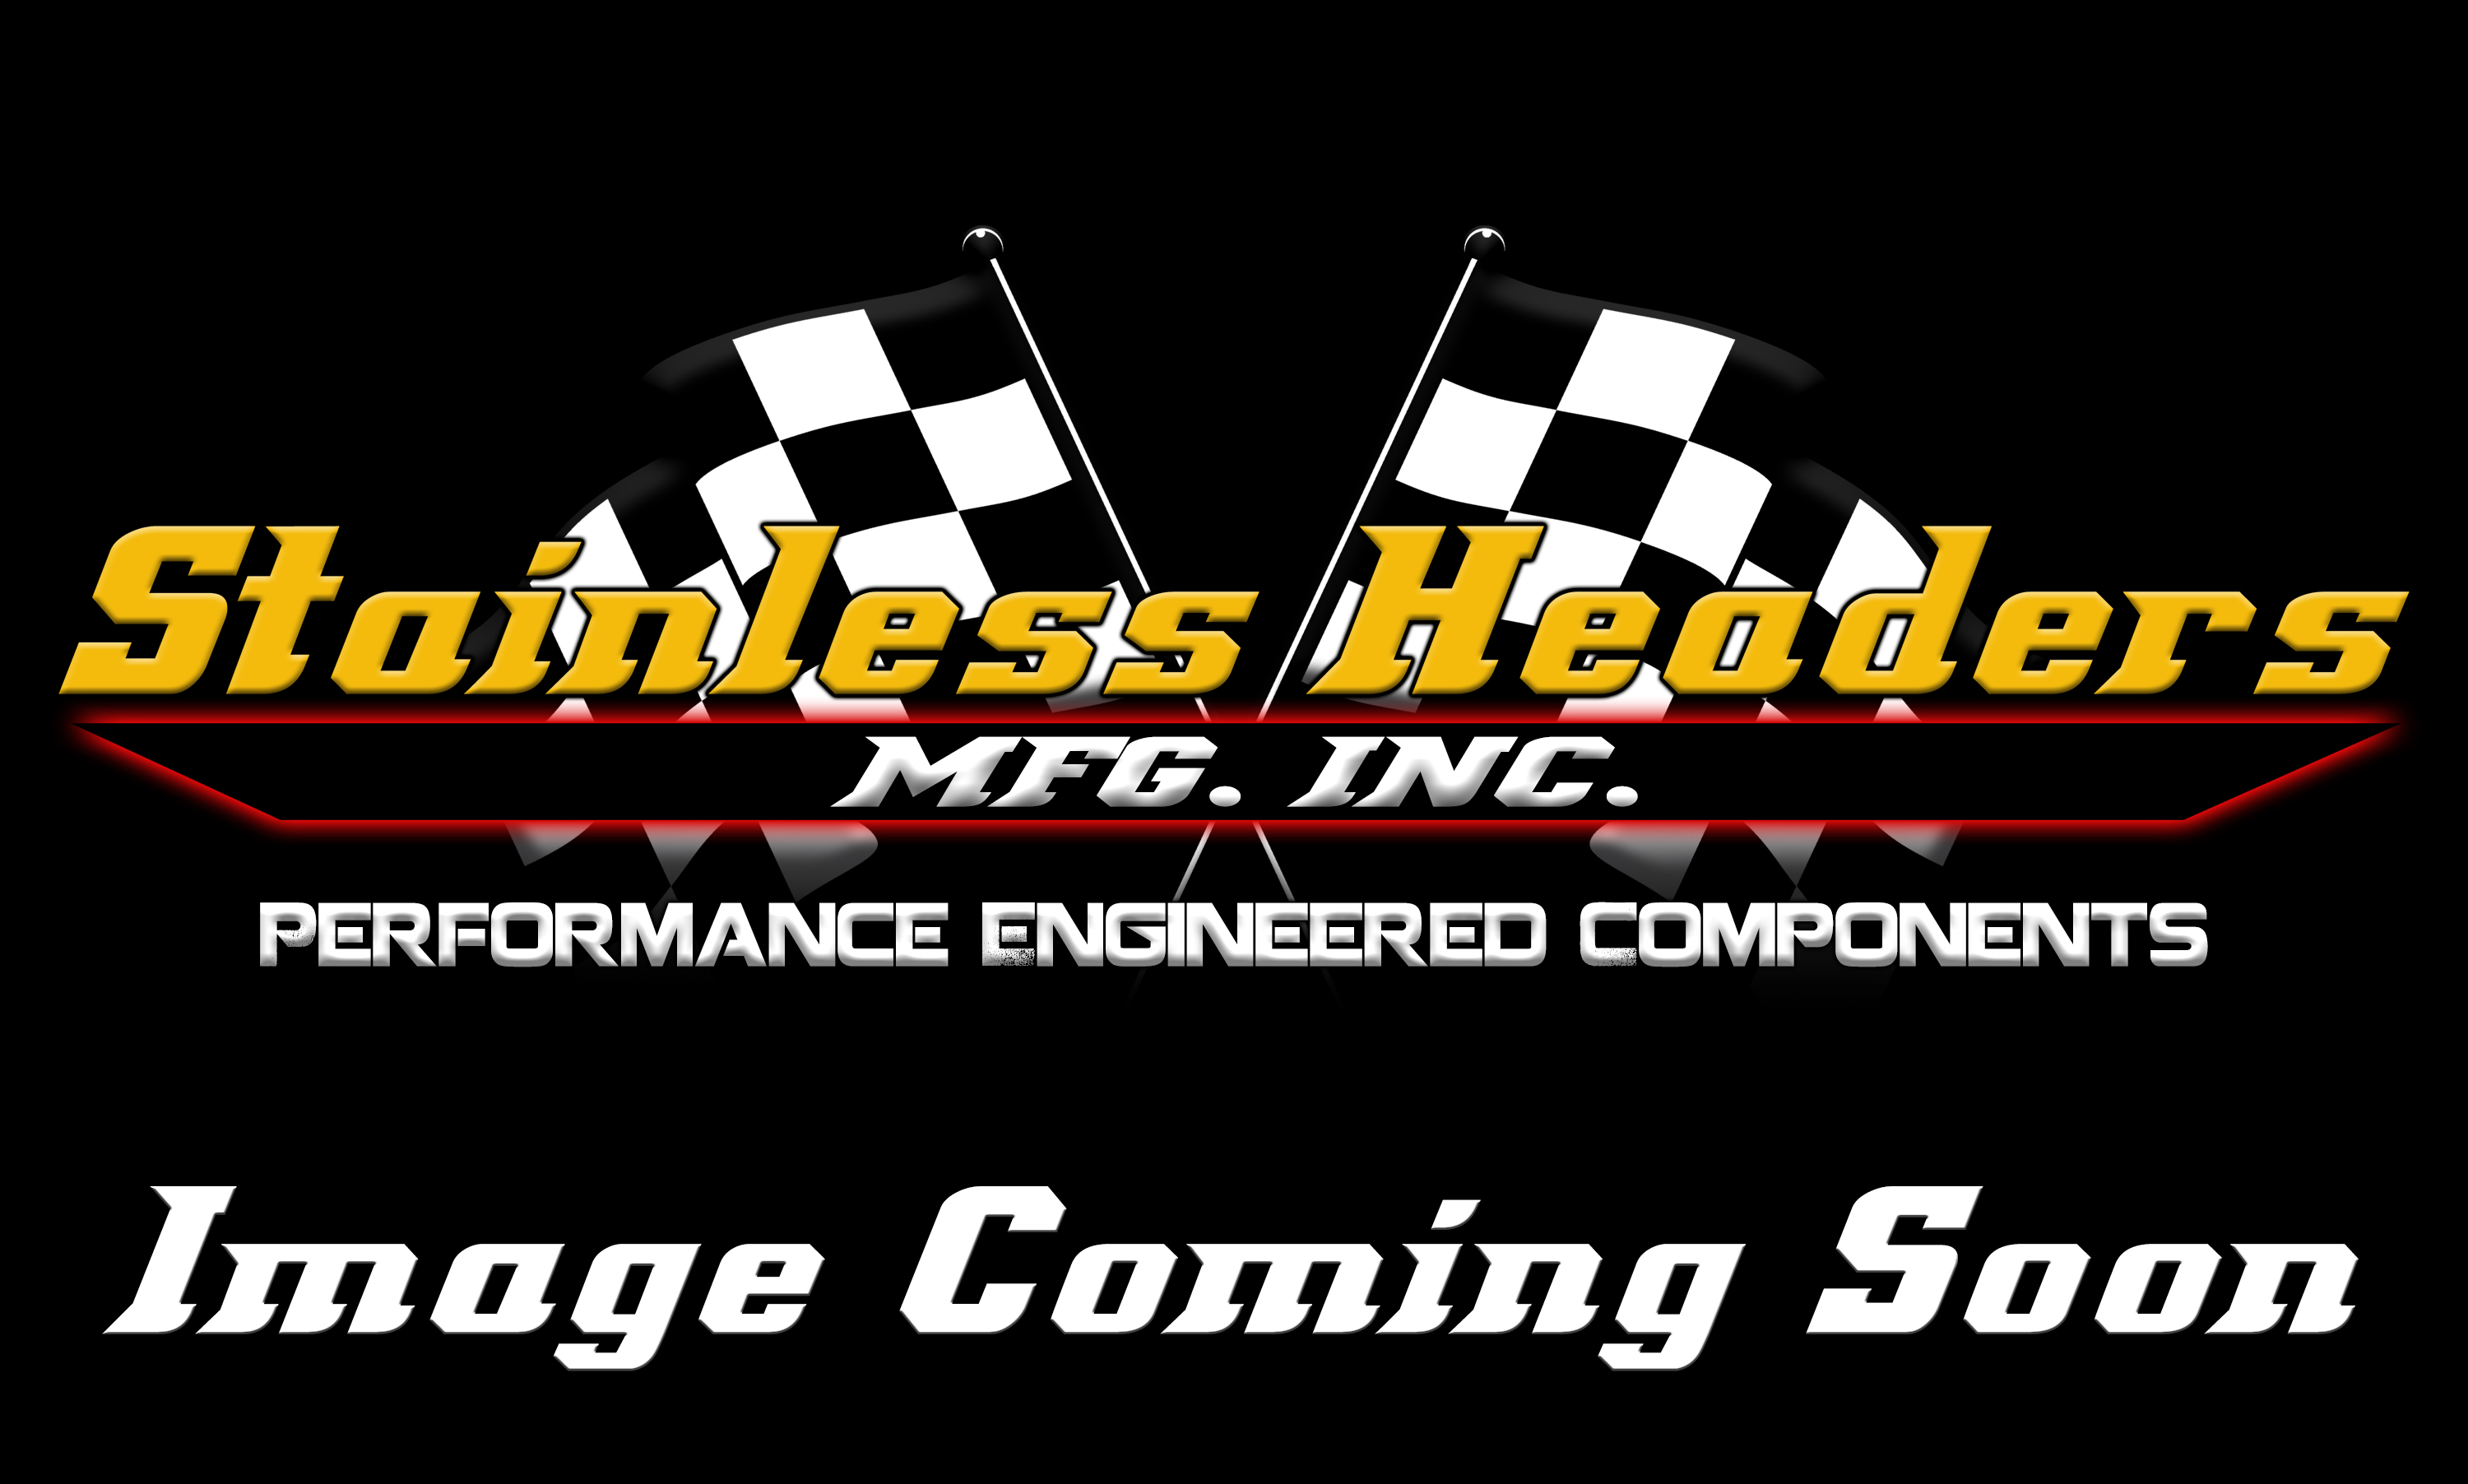 Stainless Headers - 1 1/2" Primary 4 into 1 Performance Merge Collector-16ga 321ss - Image 1